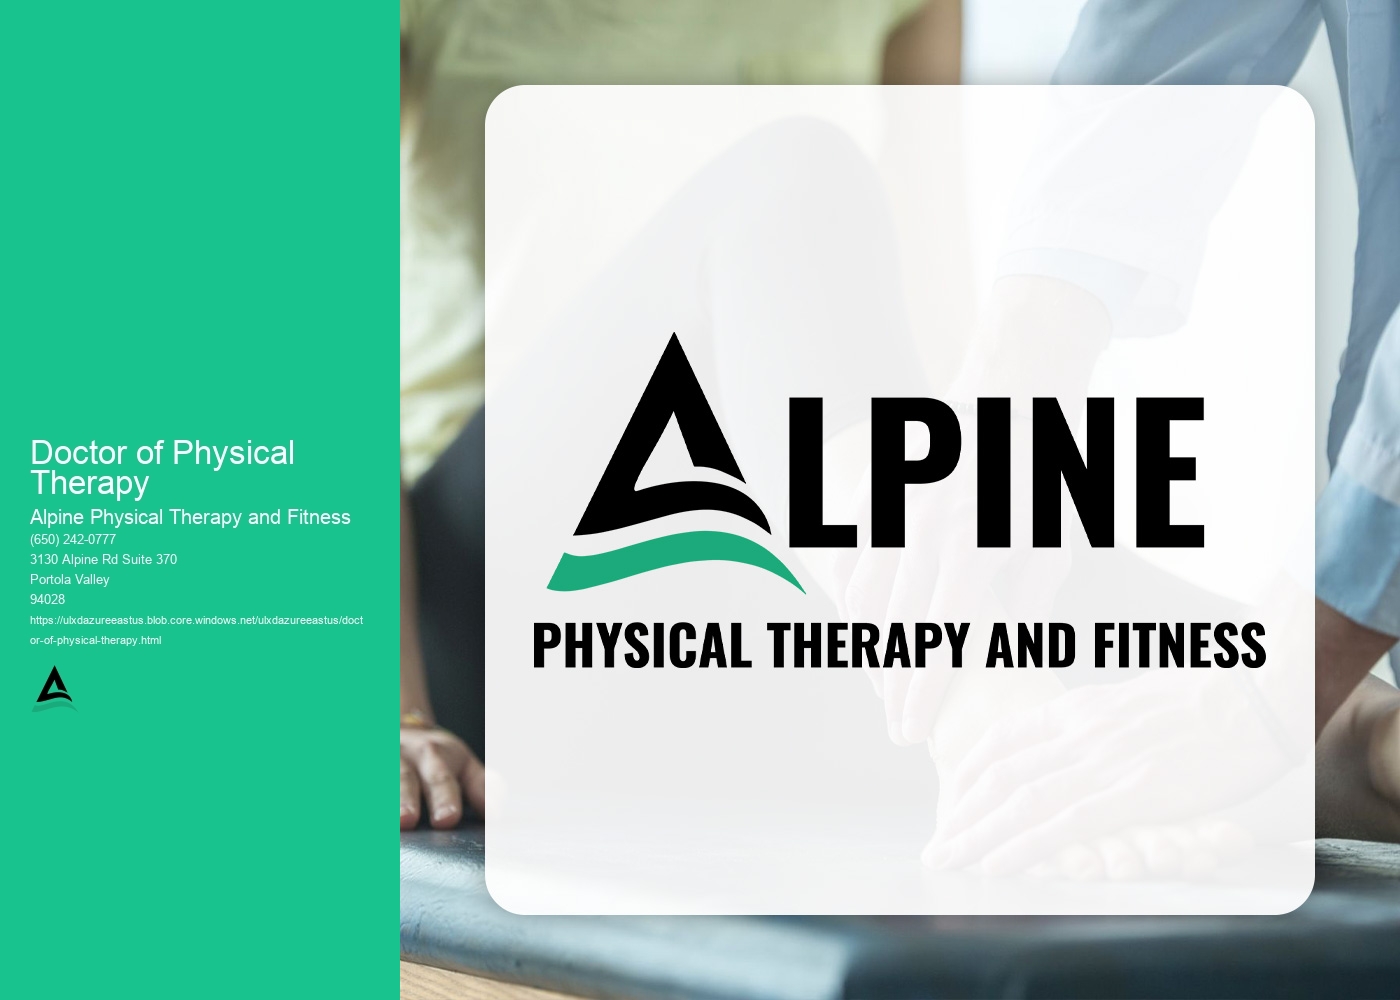 What are the best practices for incorporating therapeutic modalities, such as ultrasound and electrical stimulation, into a comprehensive physical therapy treatment plan?